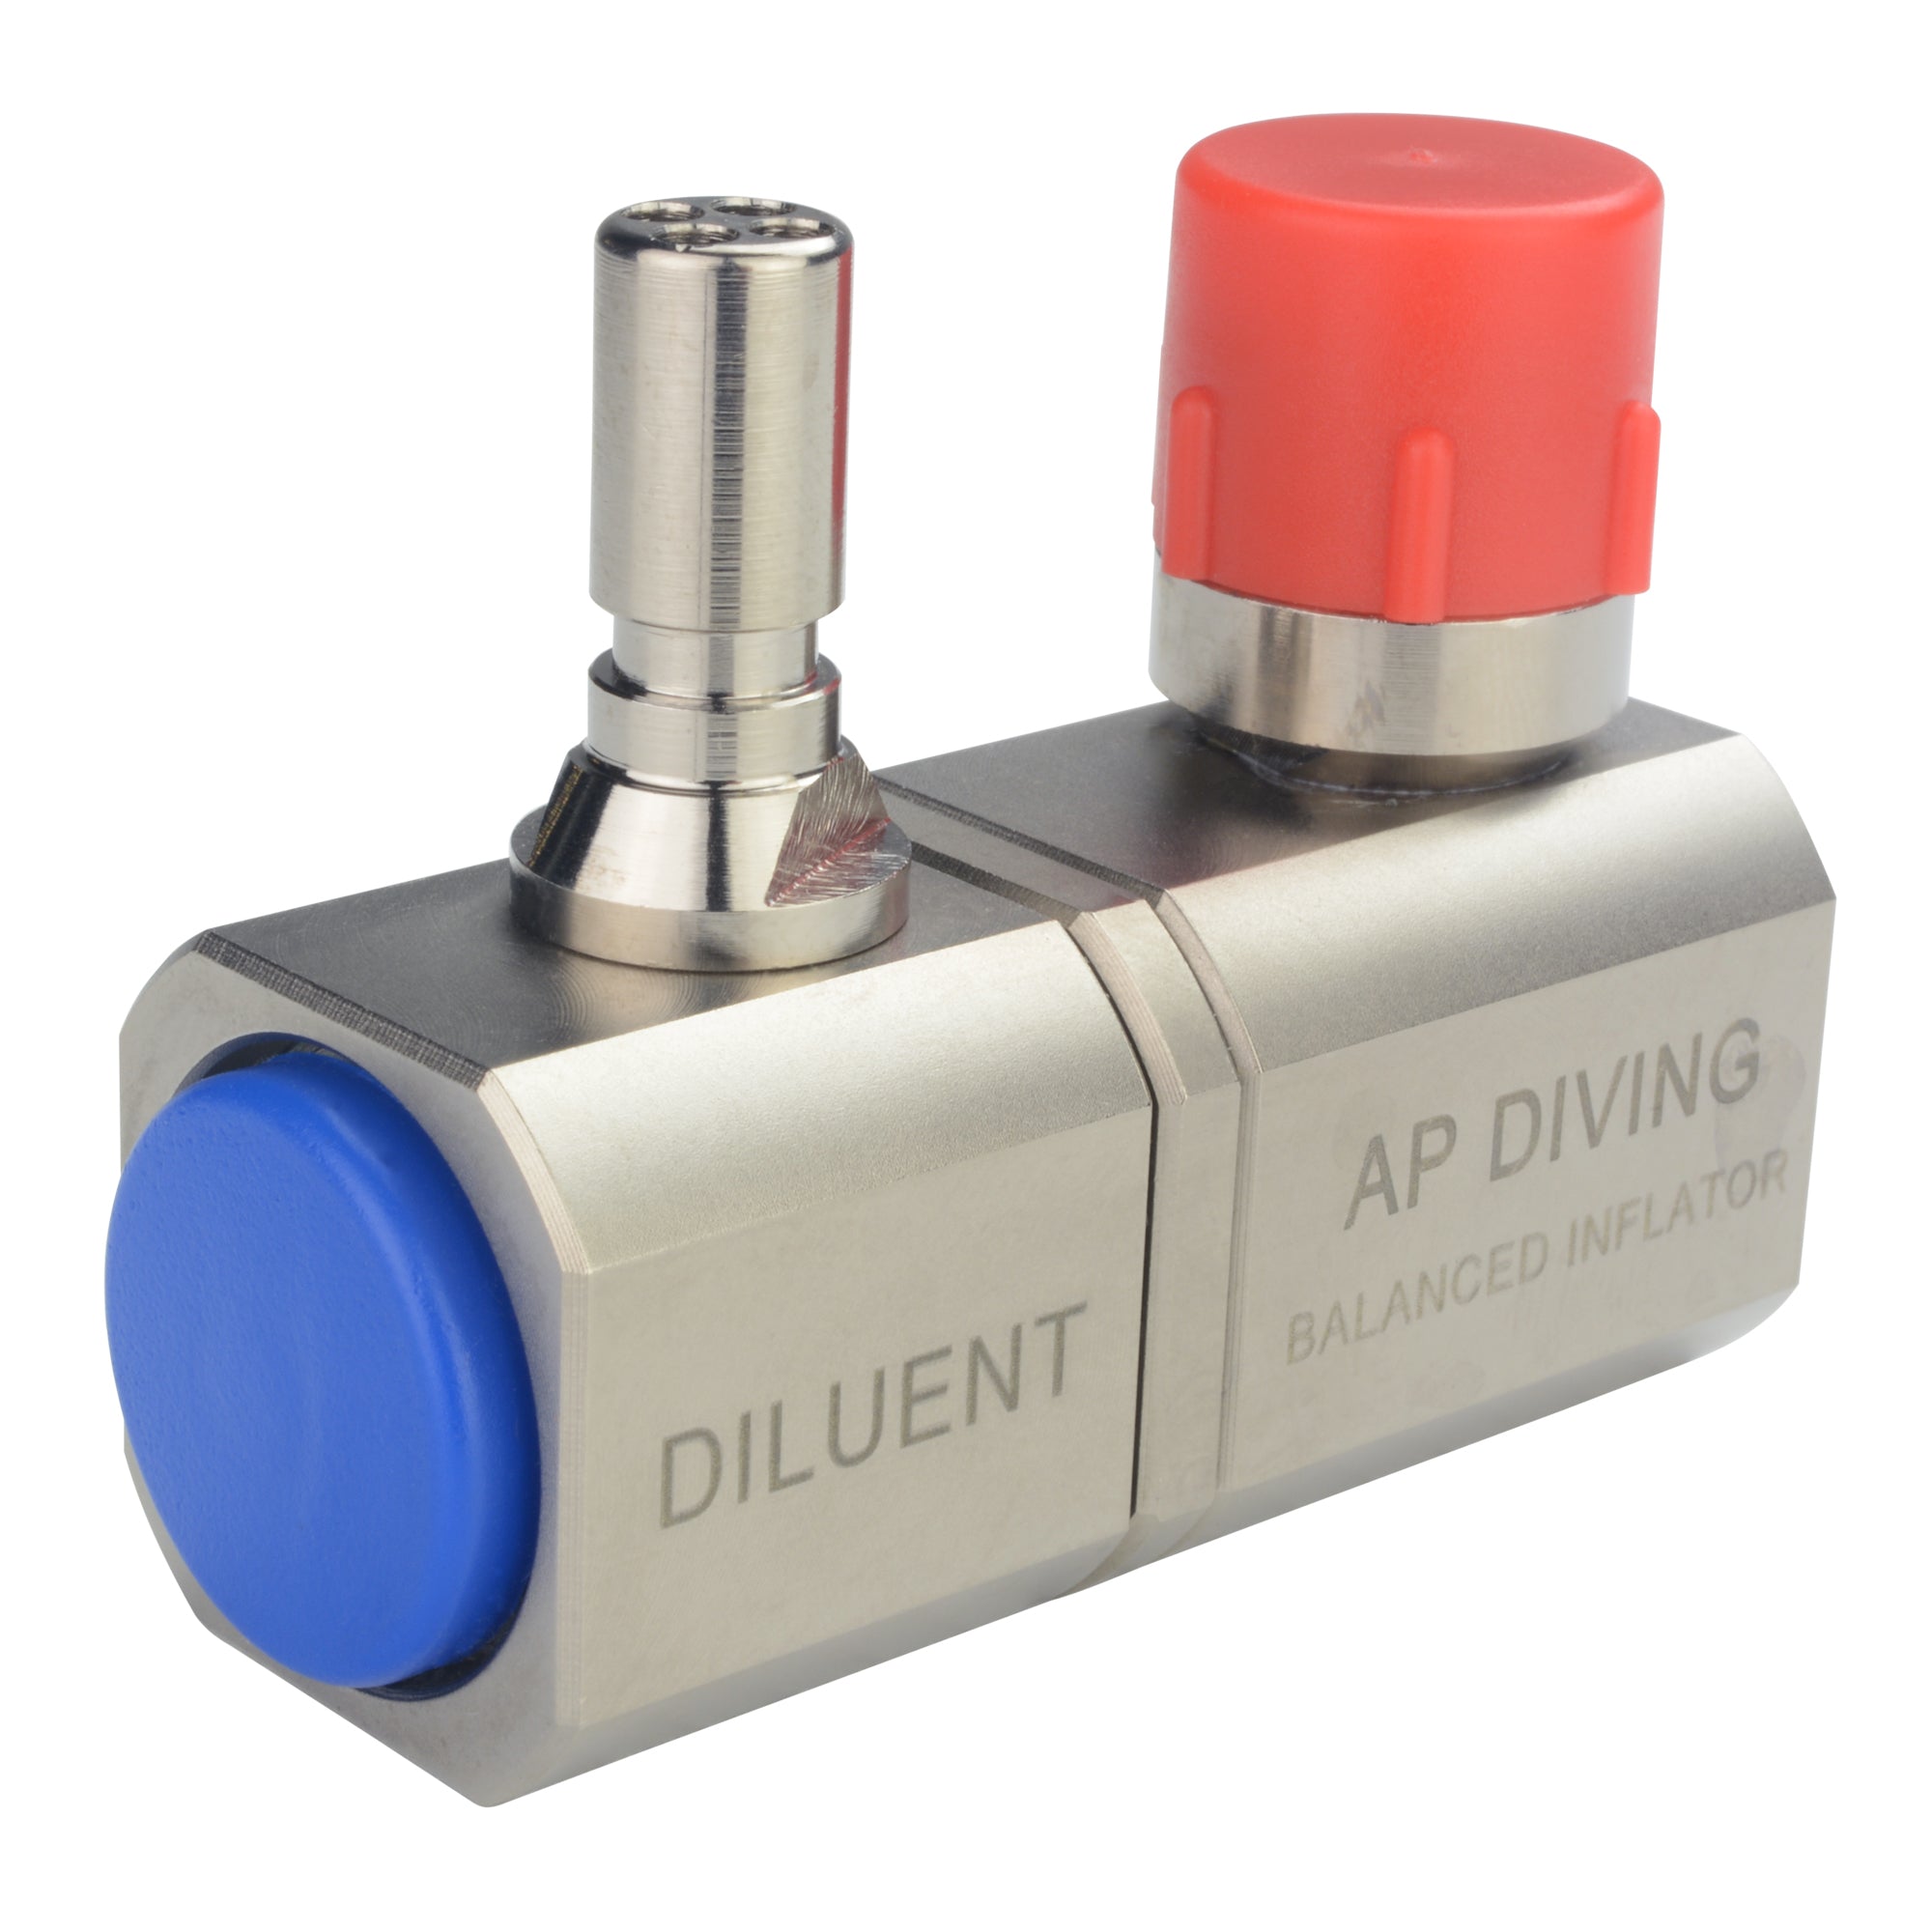 RBV07/35S - Diluent Swivel Inflator - Single| AP Diving | Silent Diving | Scuba Rebreather